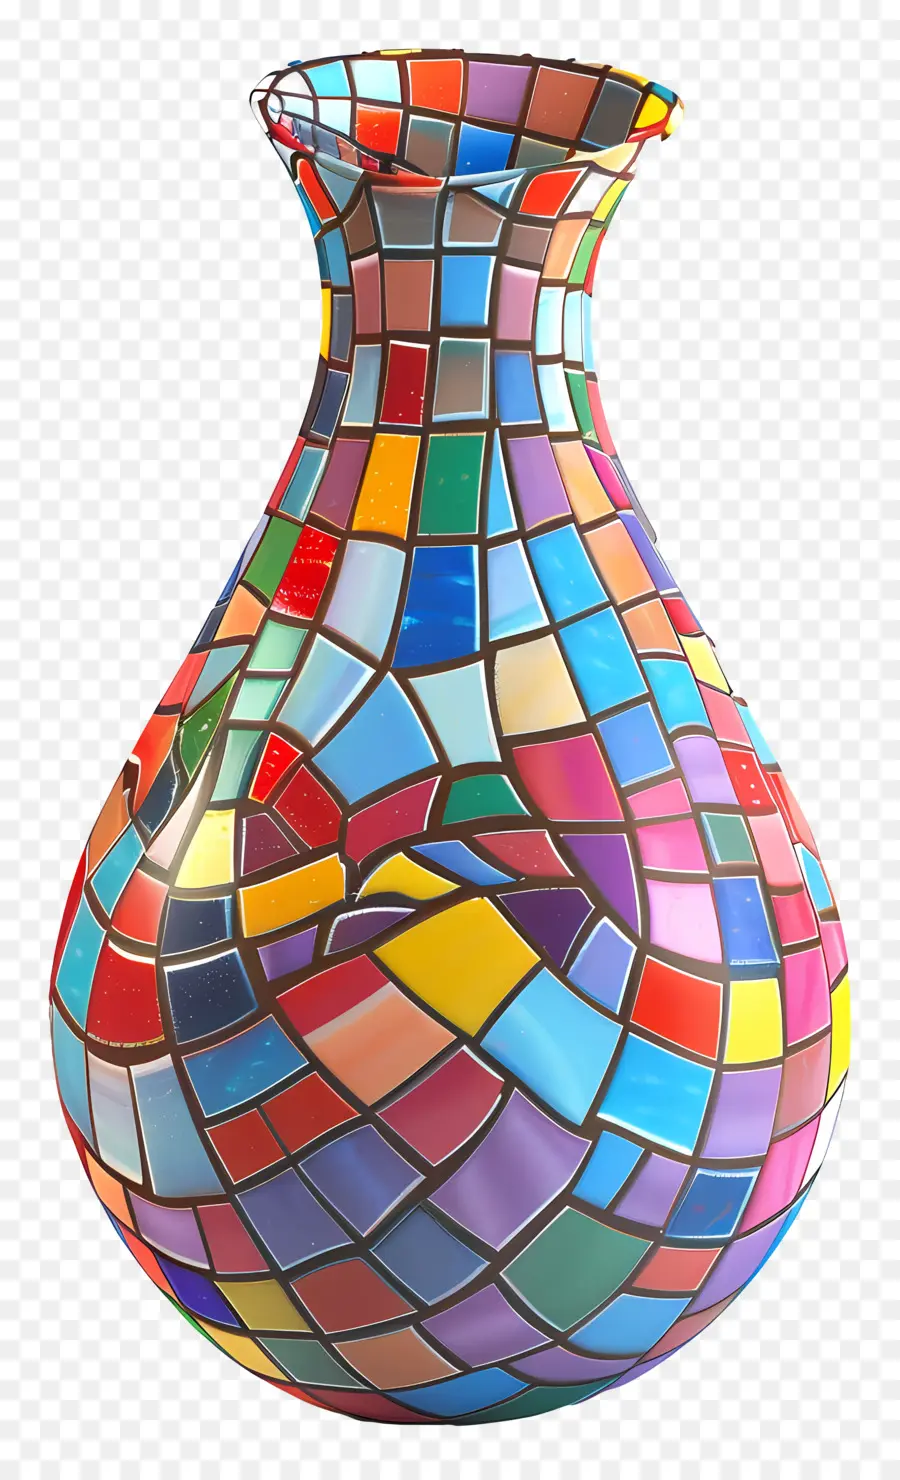 mosaic vase glass vase colorful abstract shapes iridescent symmetrical pattern